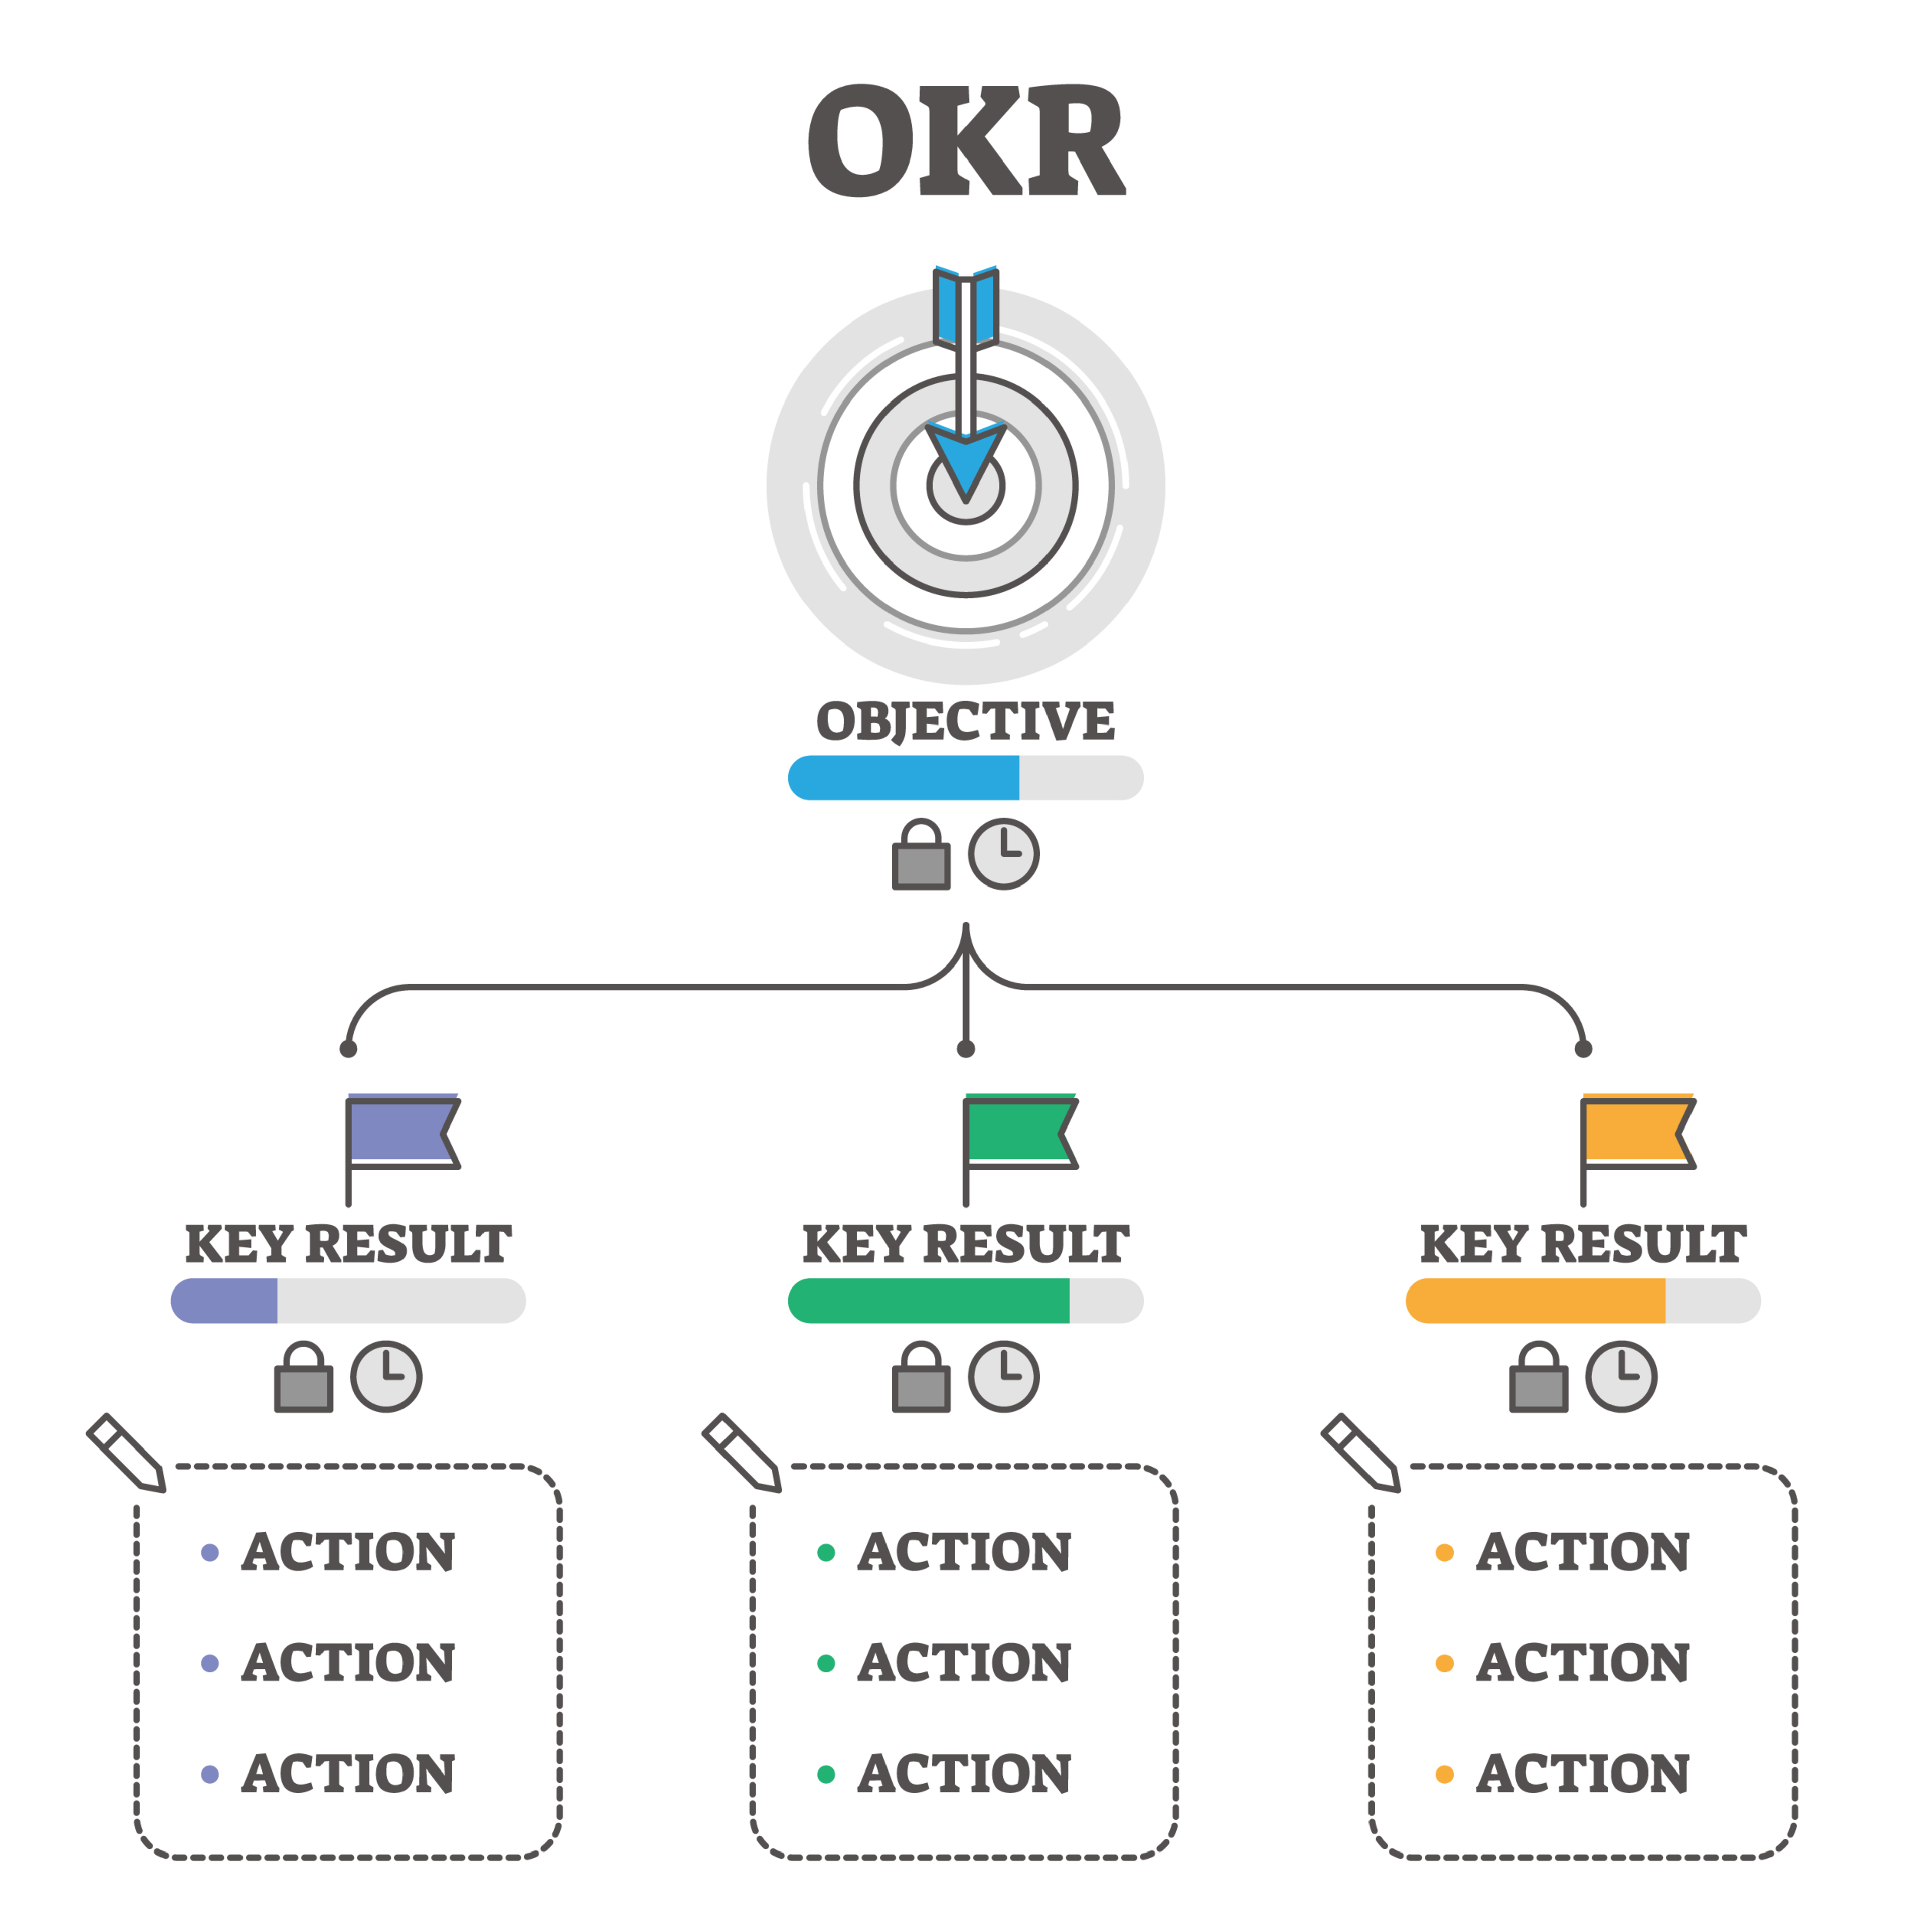 okr-chart-showing-an-objective-with-key-results-and-action-items